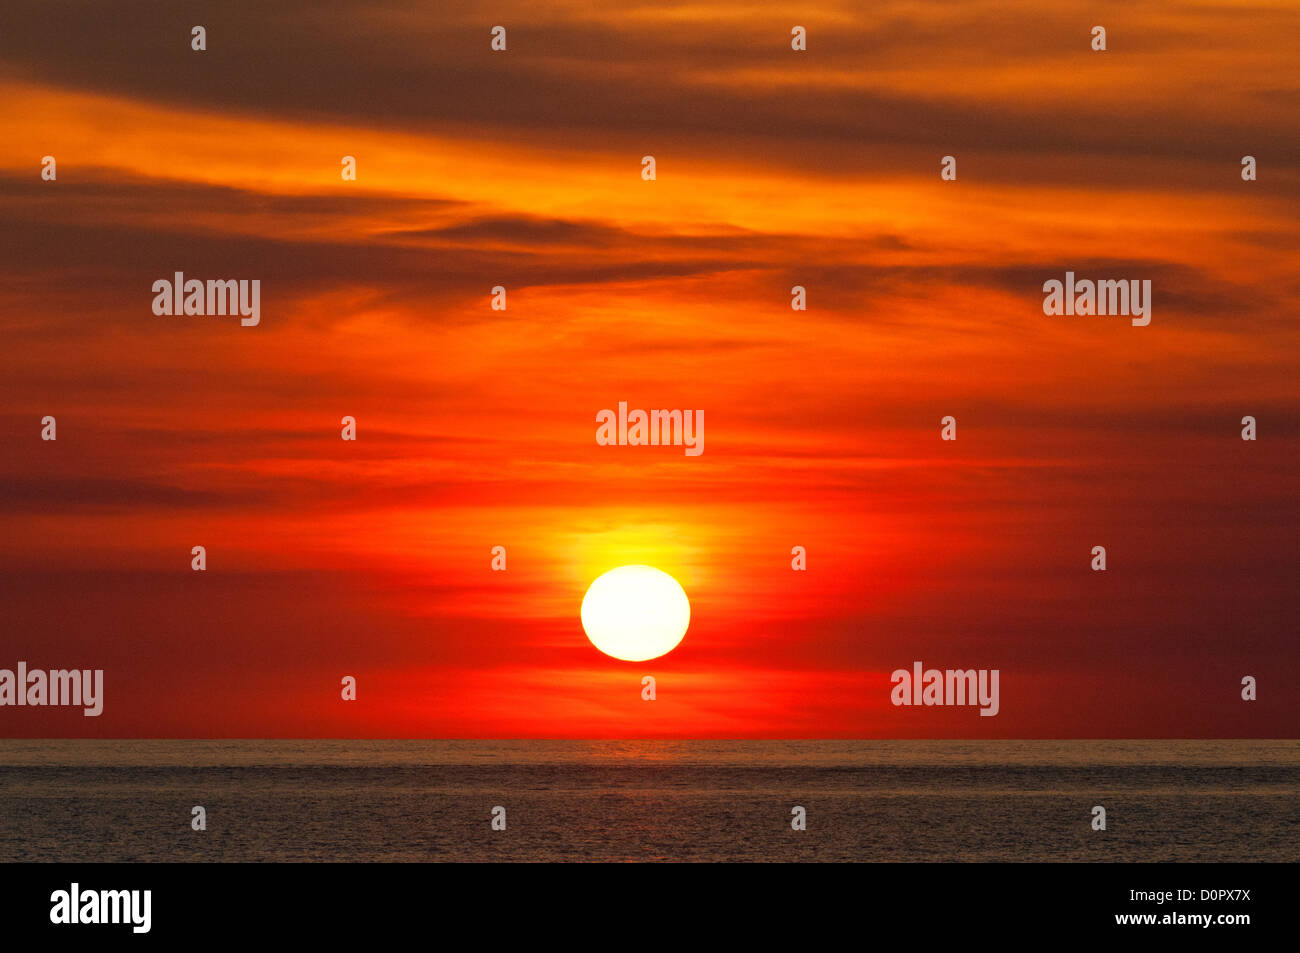 Fiery sunset over the Indian Ocean. Stock Photo